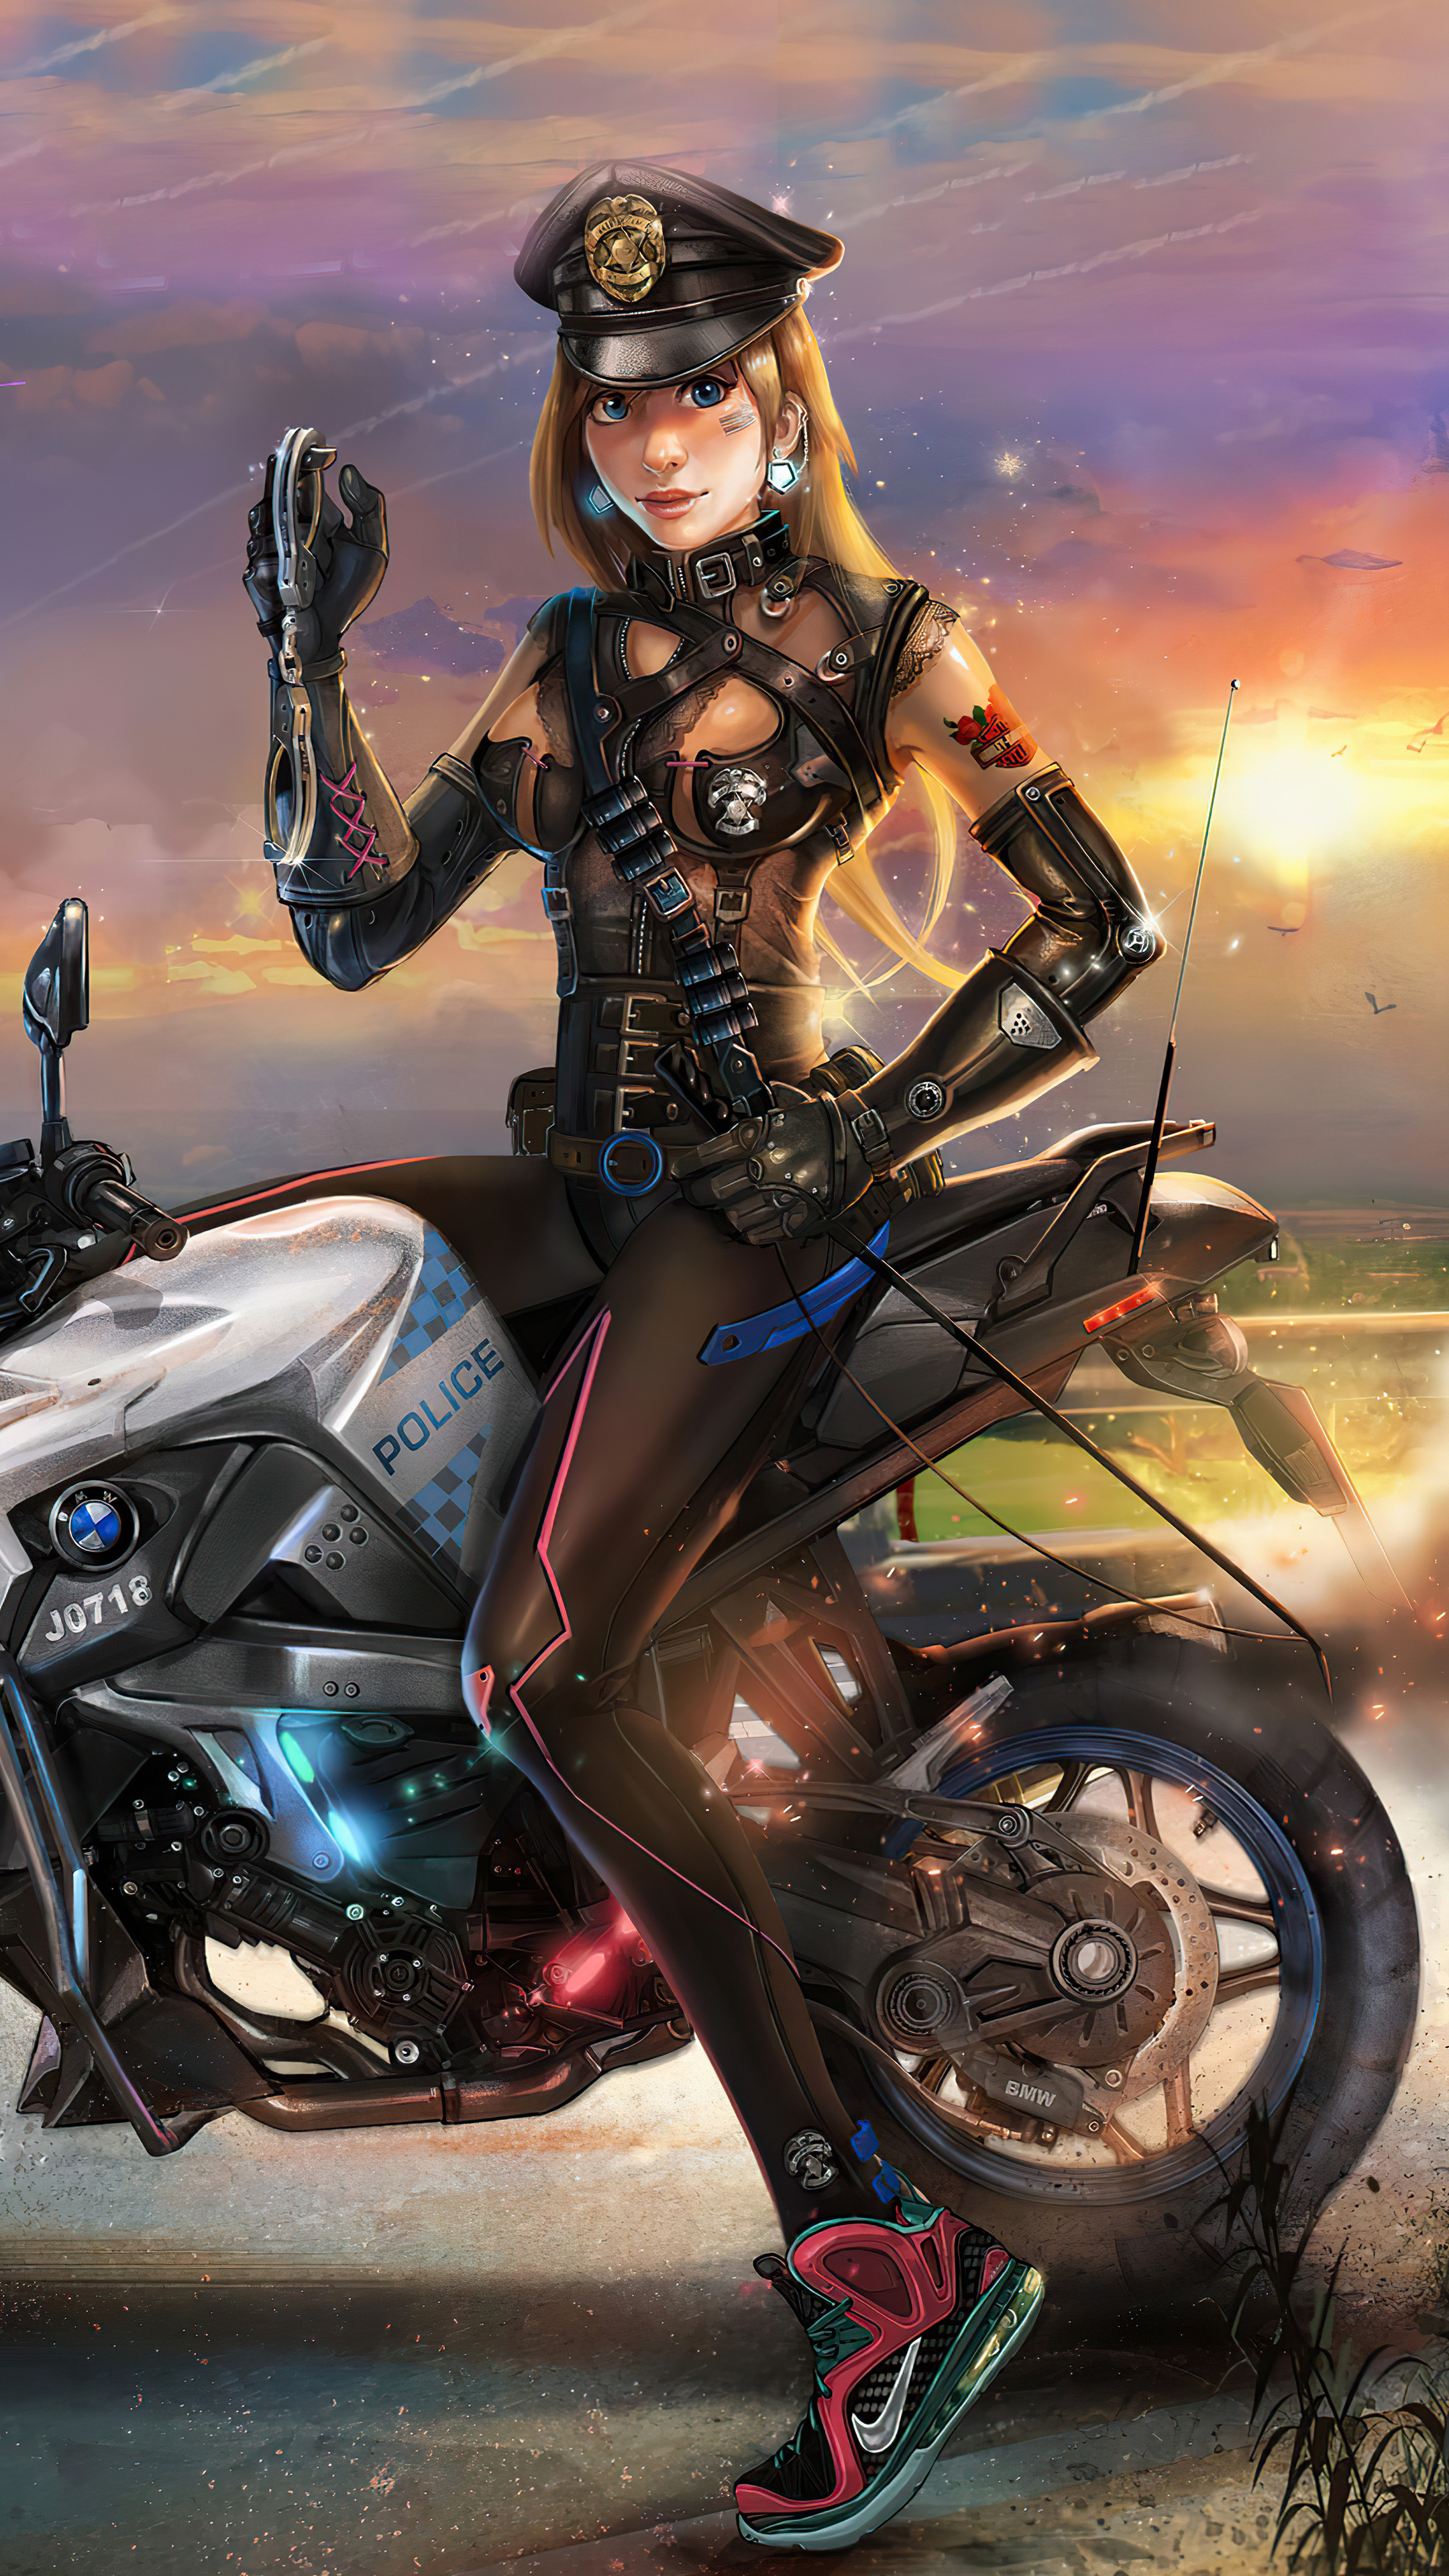 Cyber Police Girl On Bike 4k Sony Xperia X, XZ, Z5 Premium HD 4k Wallpaper, Image, Background, Photo and Picture